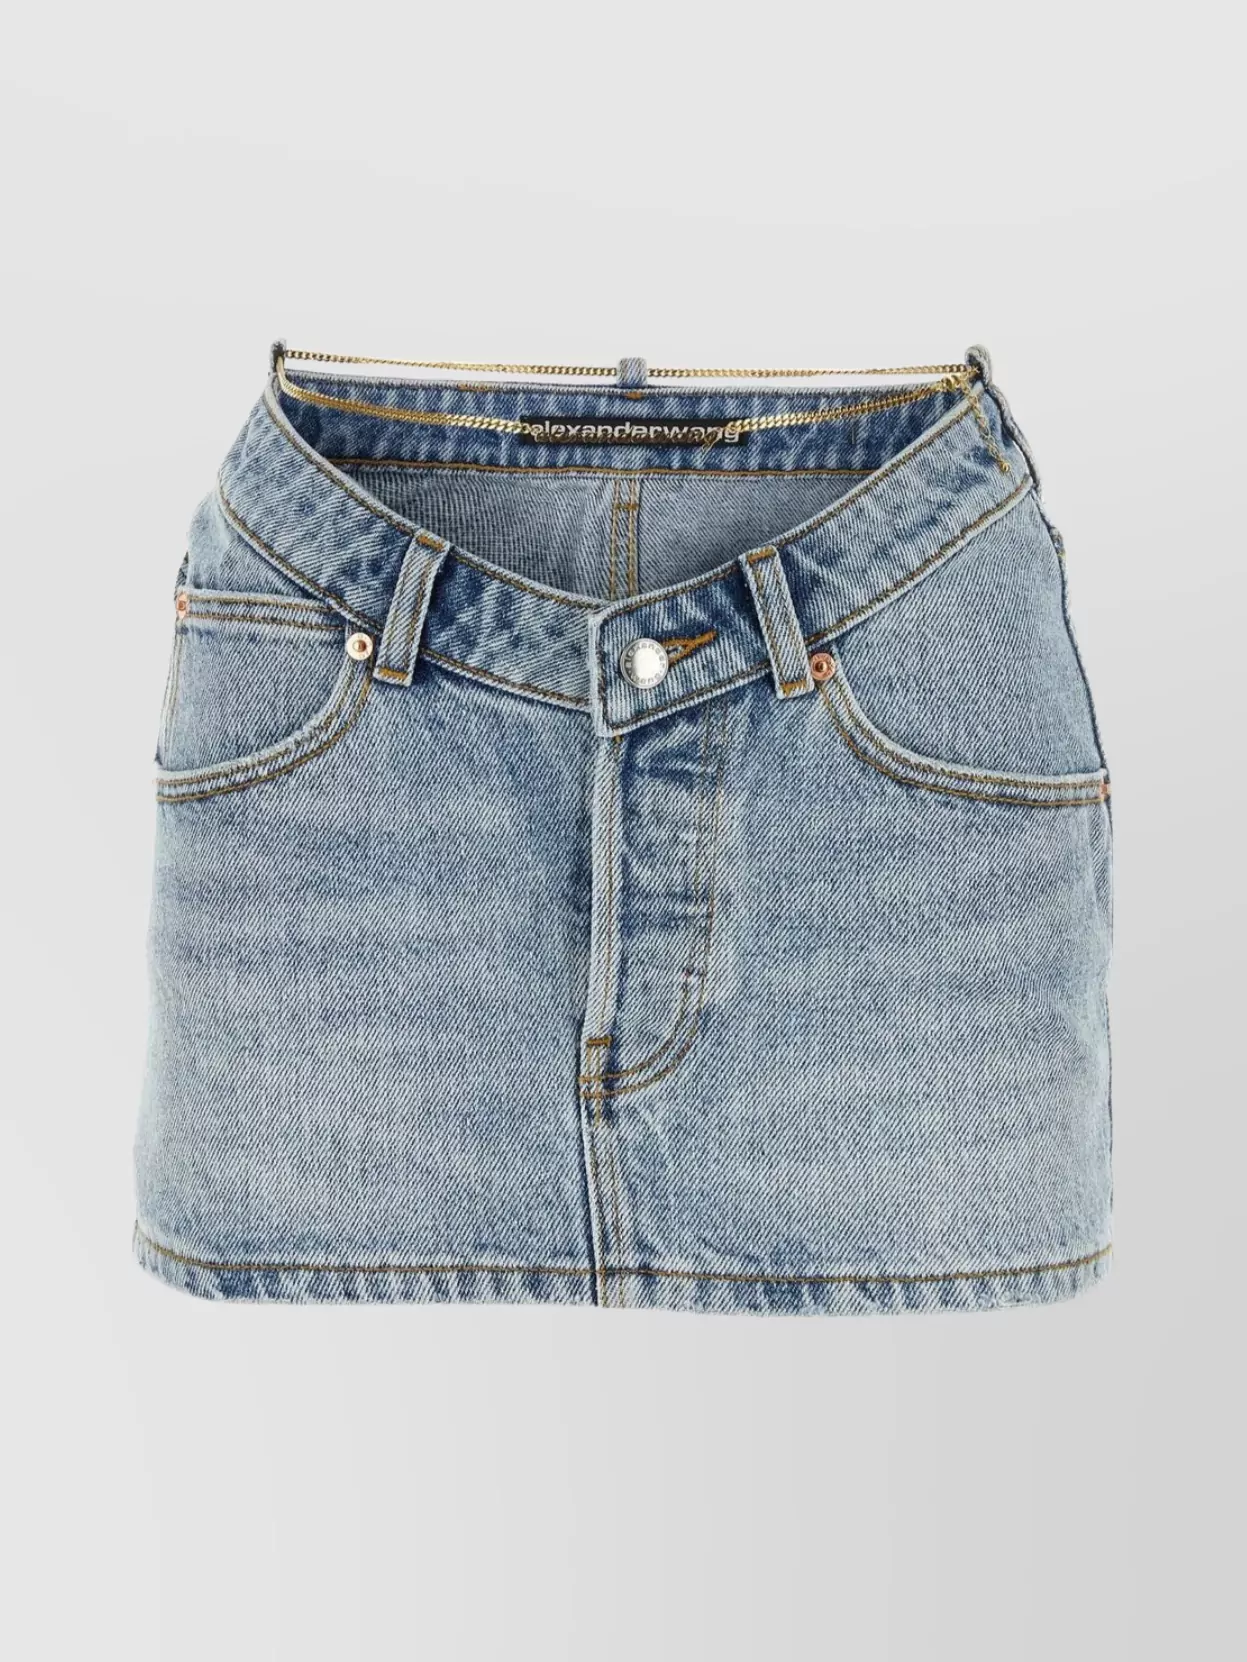 Shop Alexander Wang Cotton Denim Skirt With Belt Loops And Metal Chain